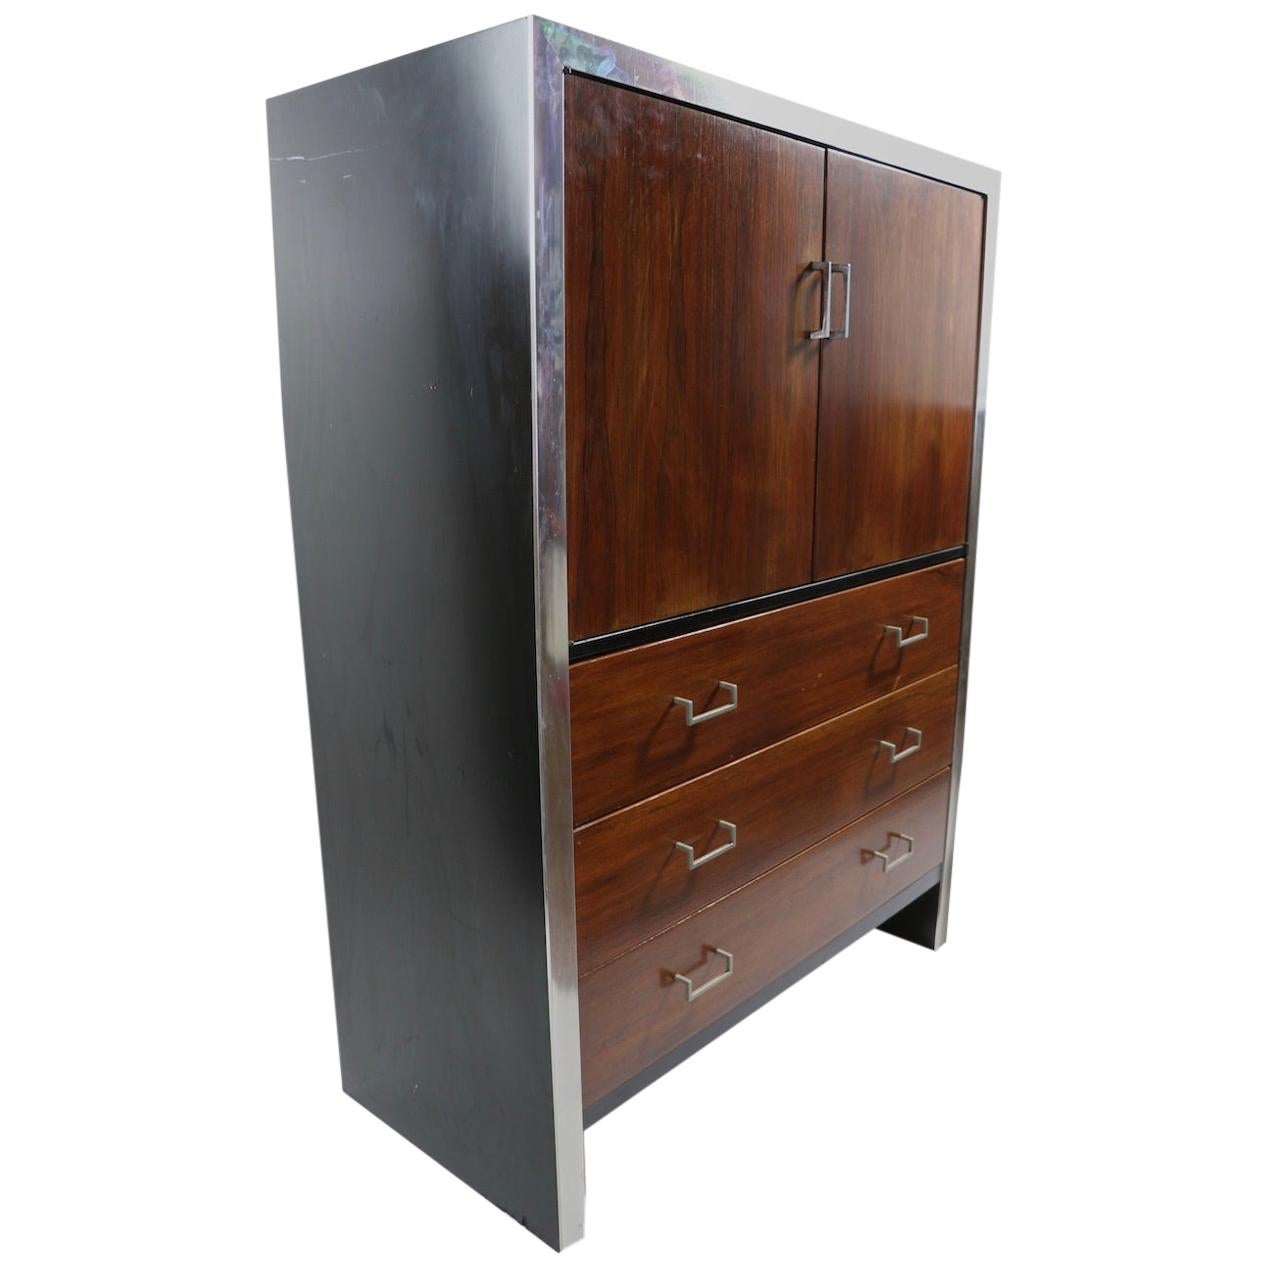 Chifferobe Amoire Wardrobe Chest Rosewood with Aluminum Trim after Baughman